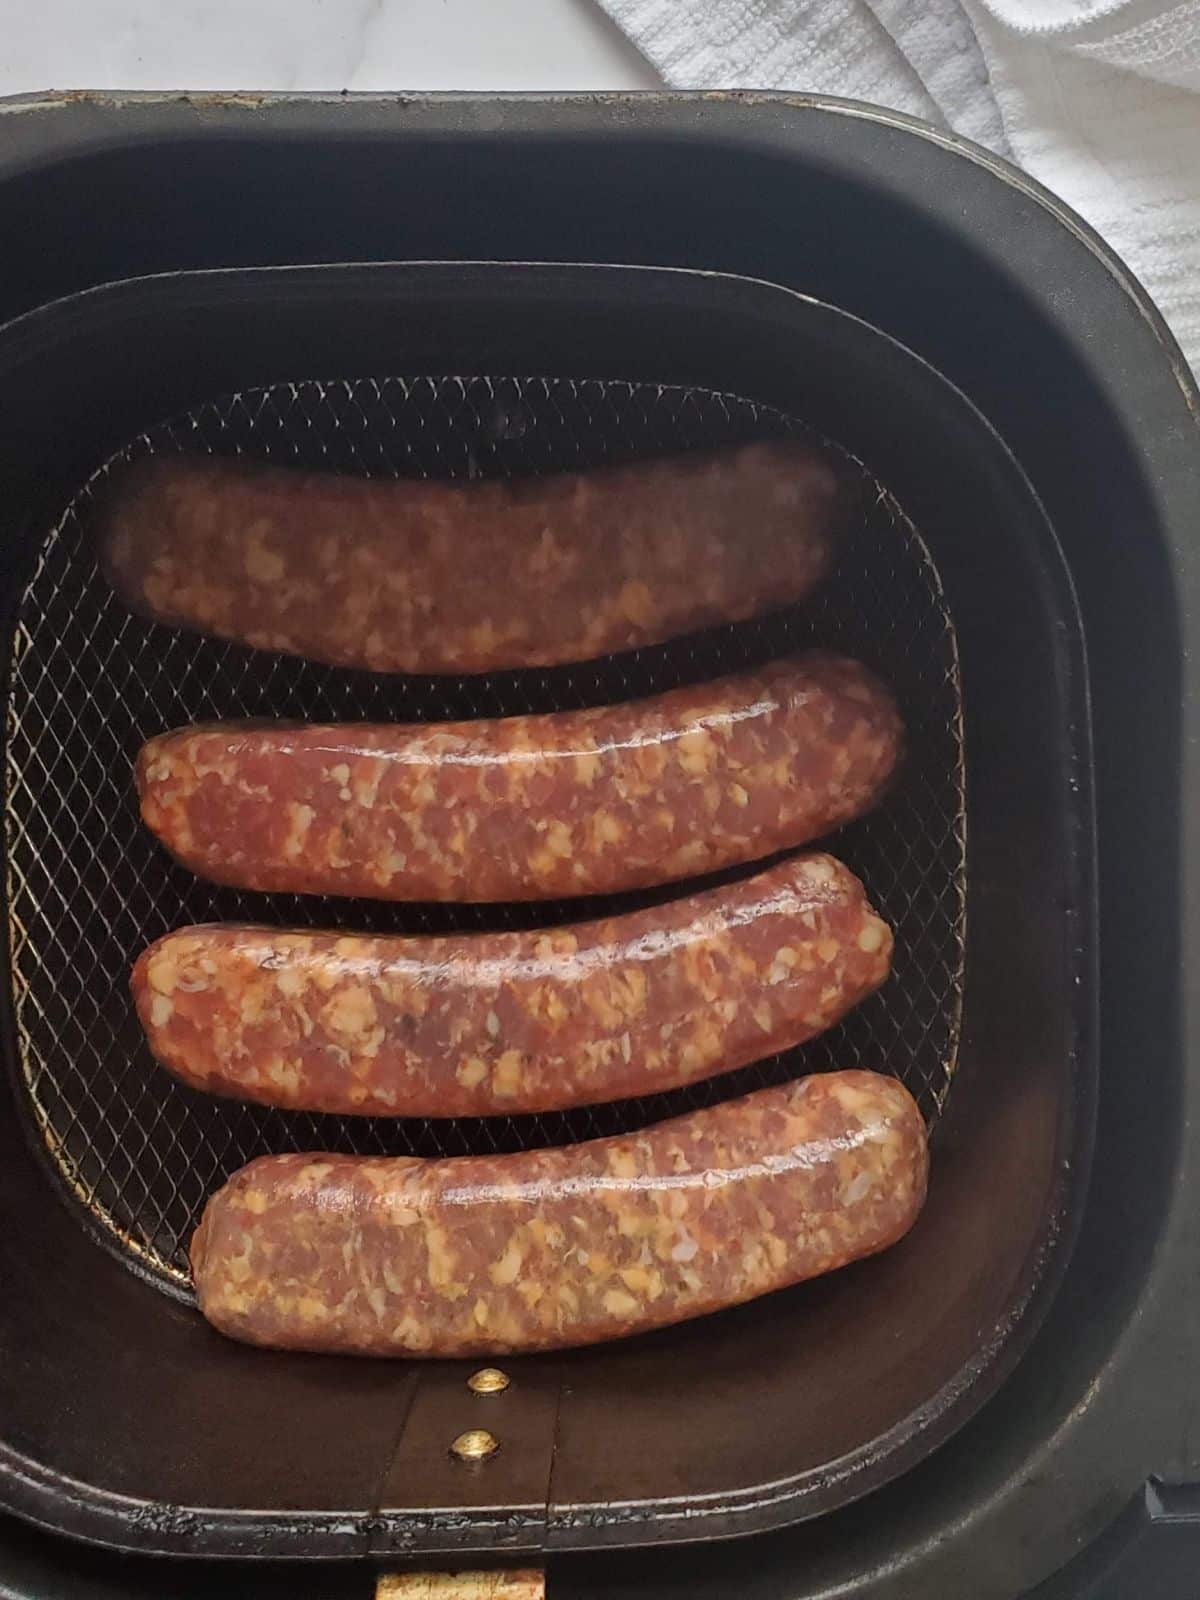 4 raw Italian sausages in the air fryer. 